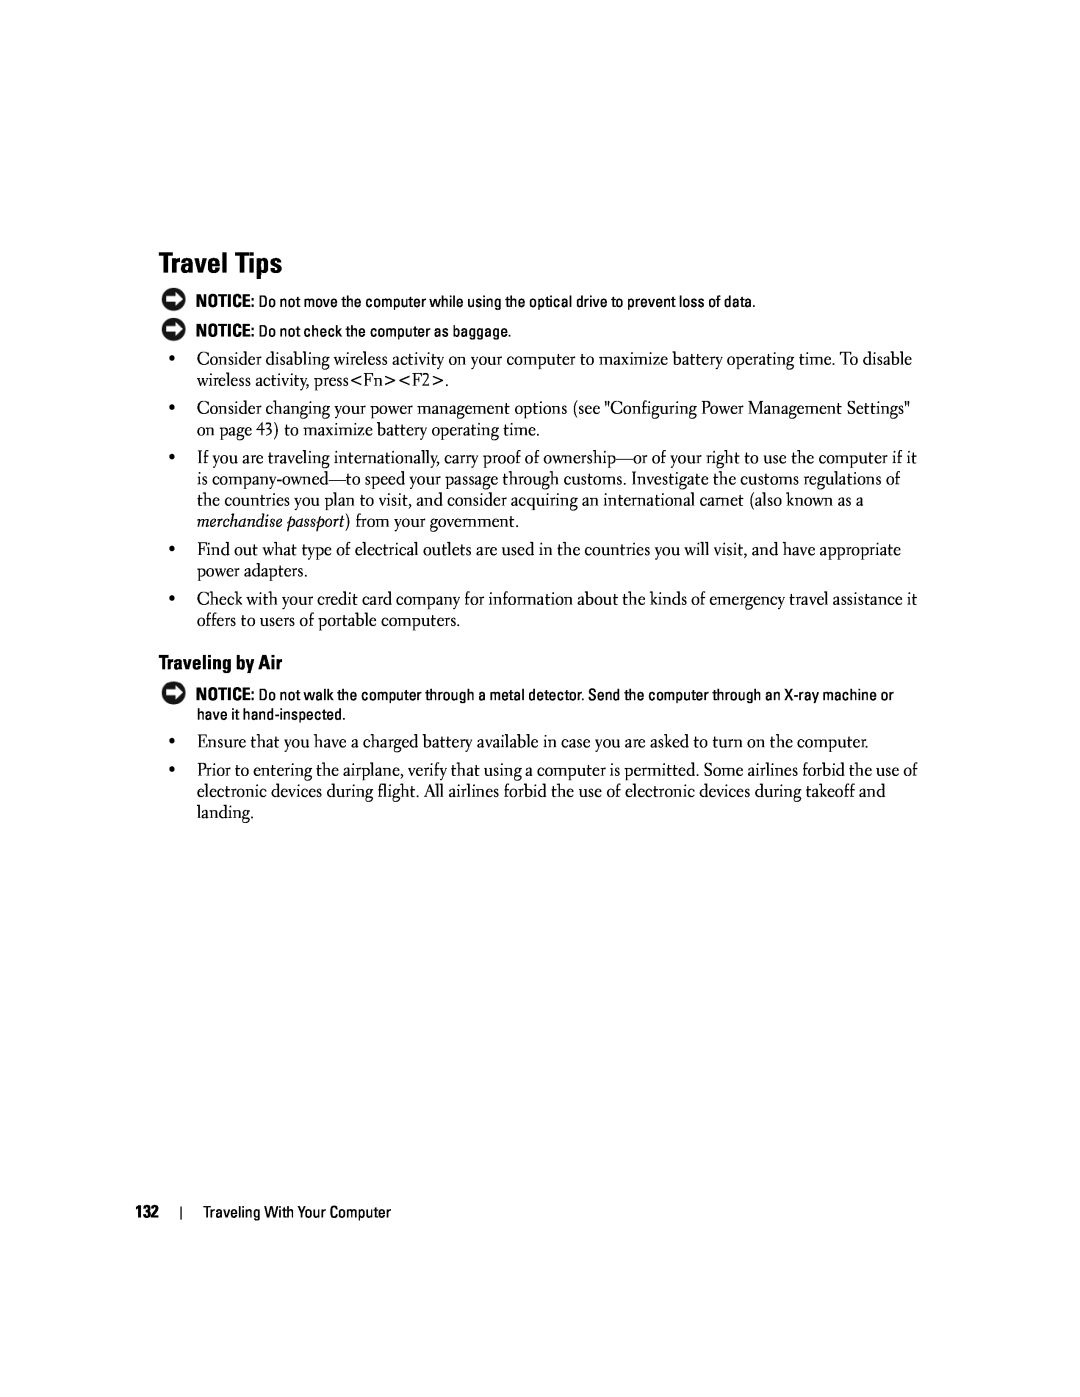 Dell PP20L owner manual Travel Tips, Traveling by Air 